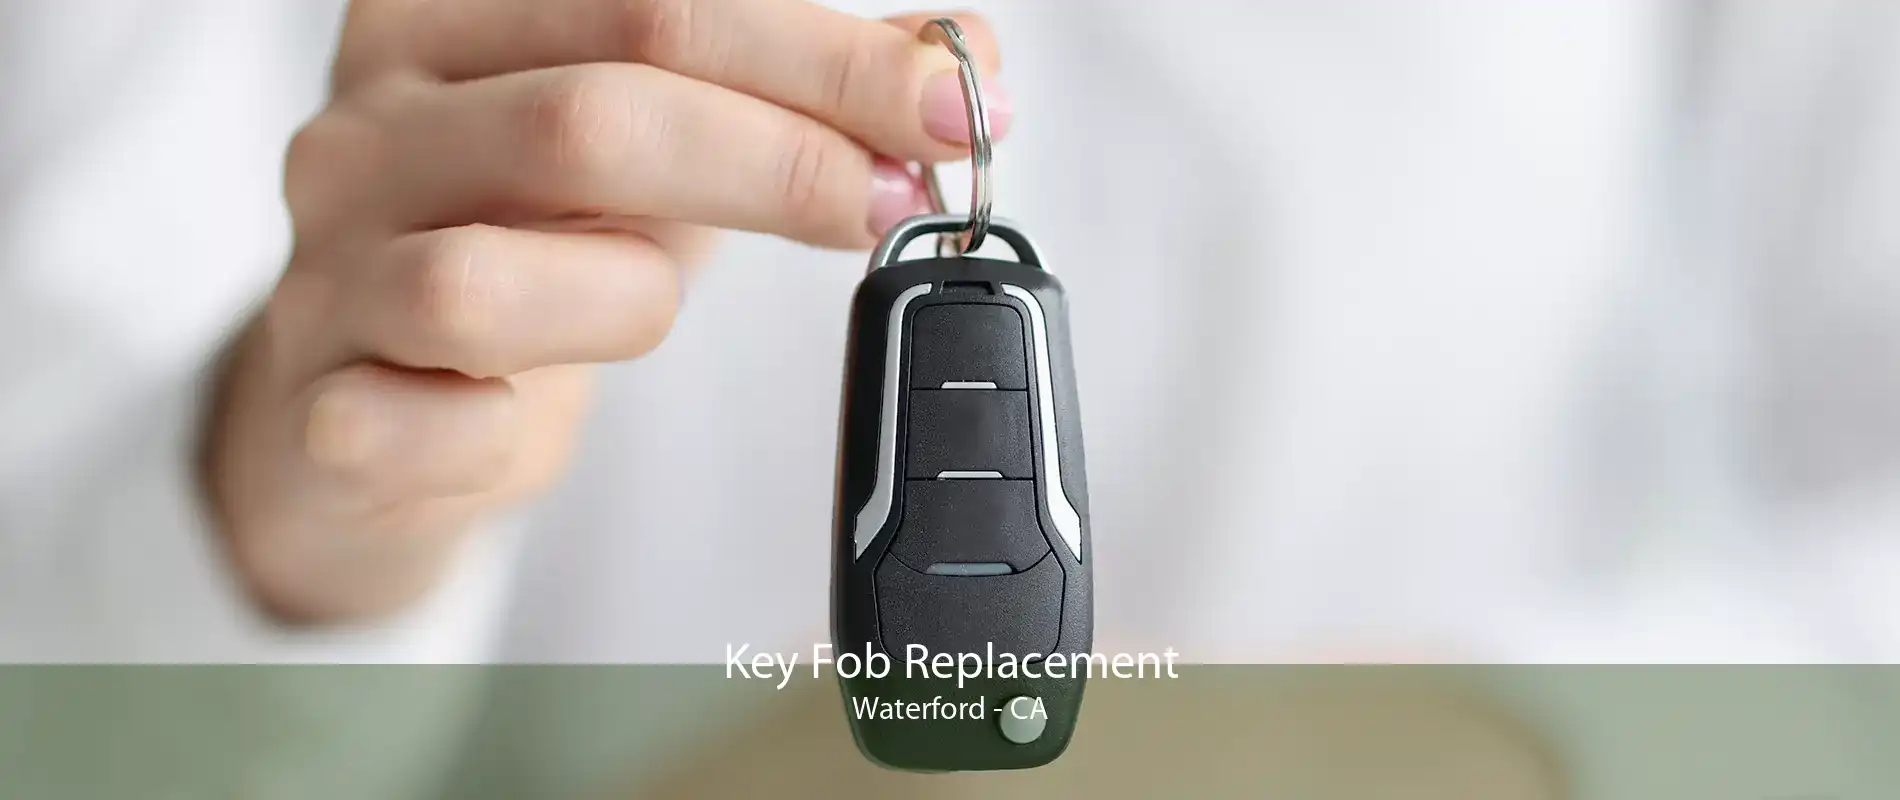 Key Fob Replacement Waterford - CA